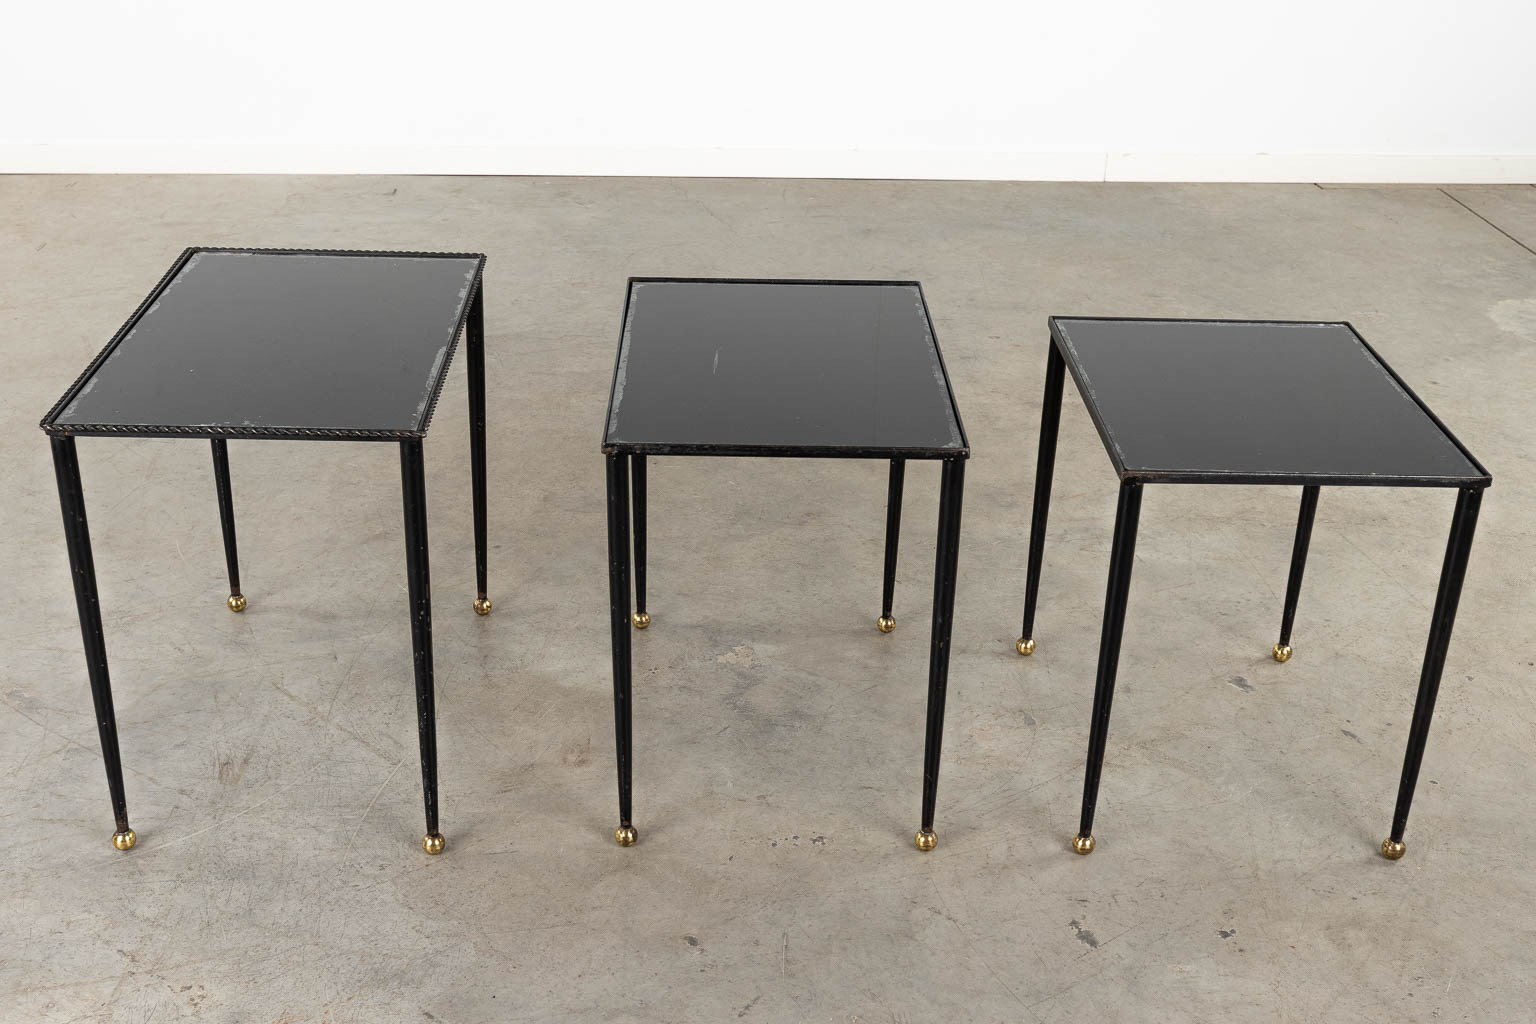 A set of Nesting tables, metal and black tinted glass. 20th C. (D:56 x W:37 x H:50 cm)